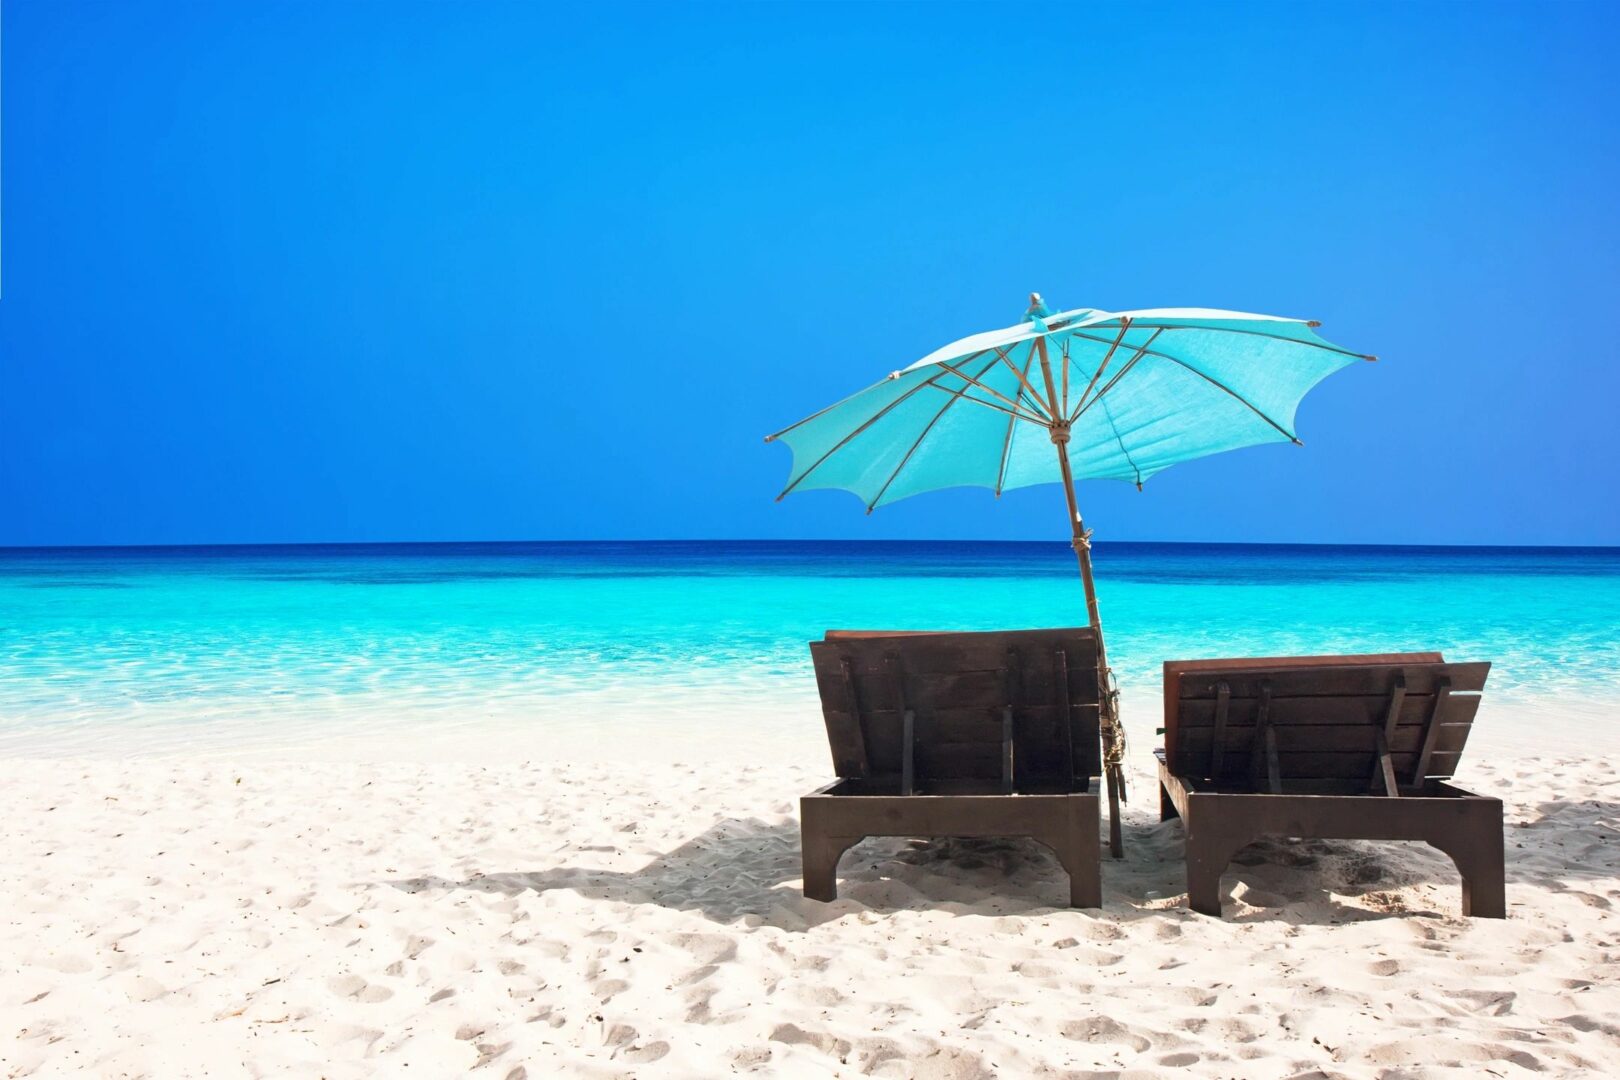 Two chairs and an umbrella on a beach.